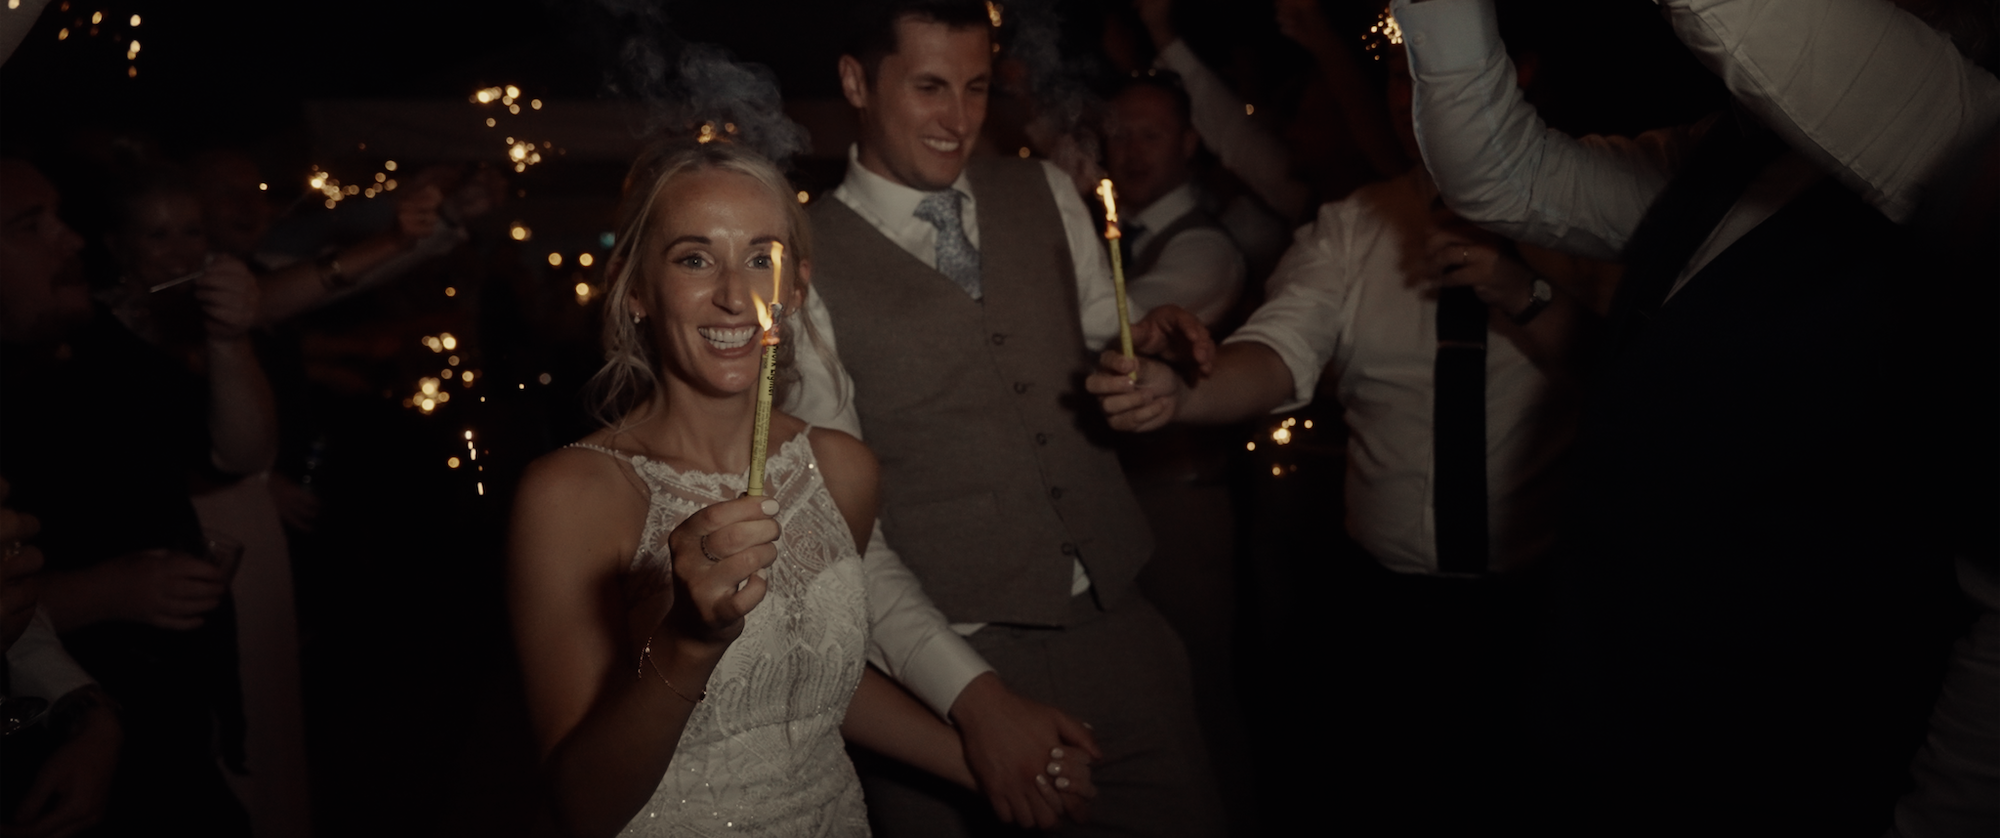 Oxwich Bay Hotel Wedding Videography by Ben Holbrook Films (Swansea South Wales).jpeg44.png